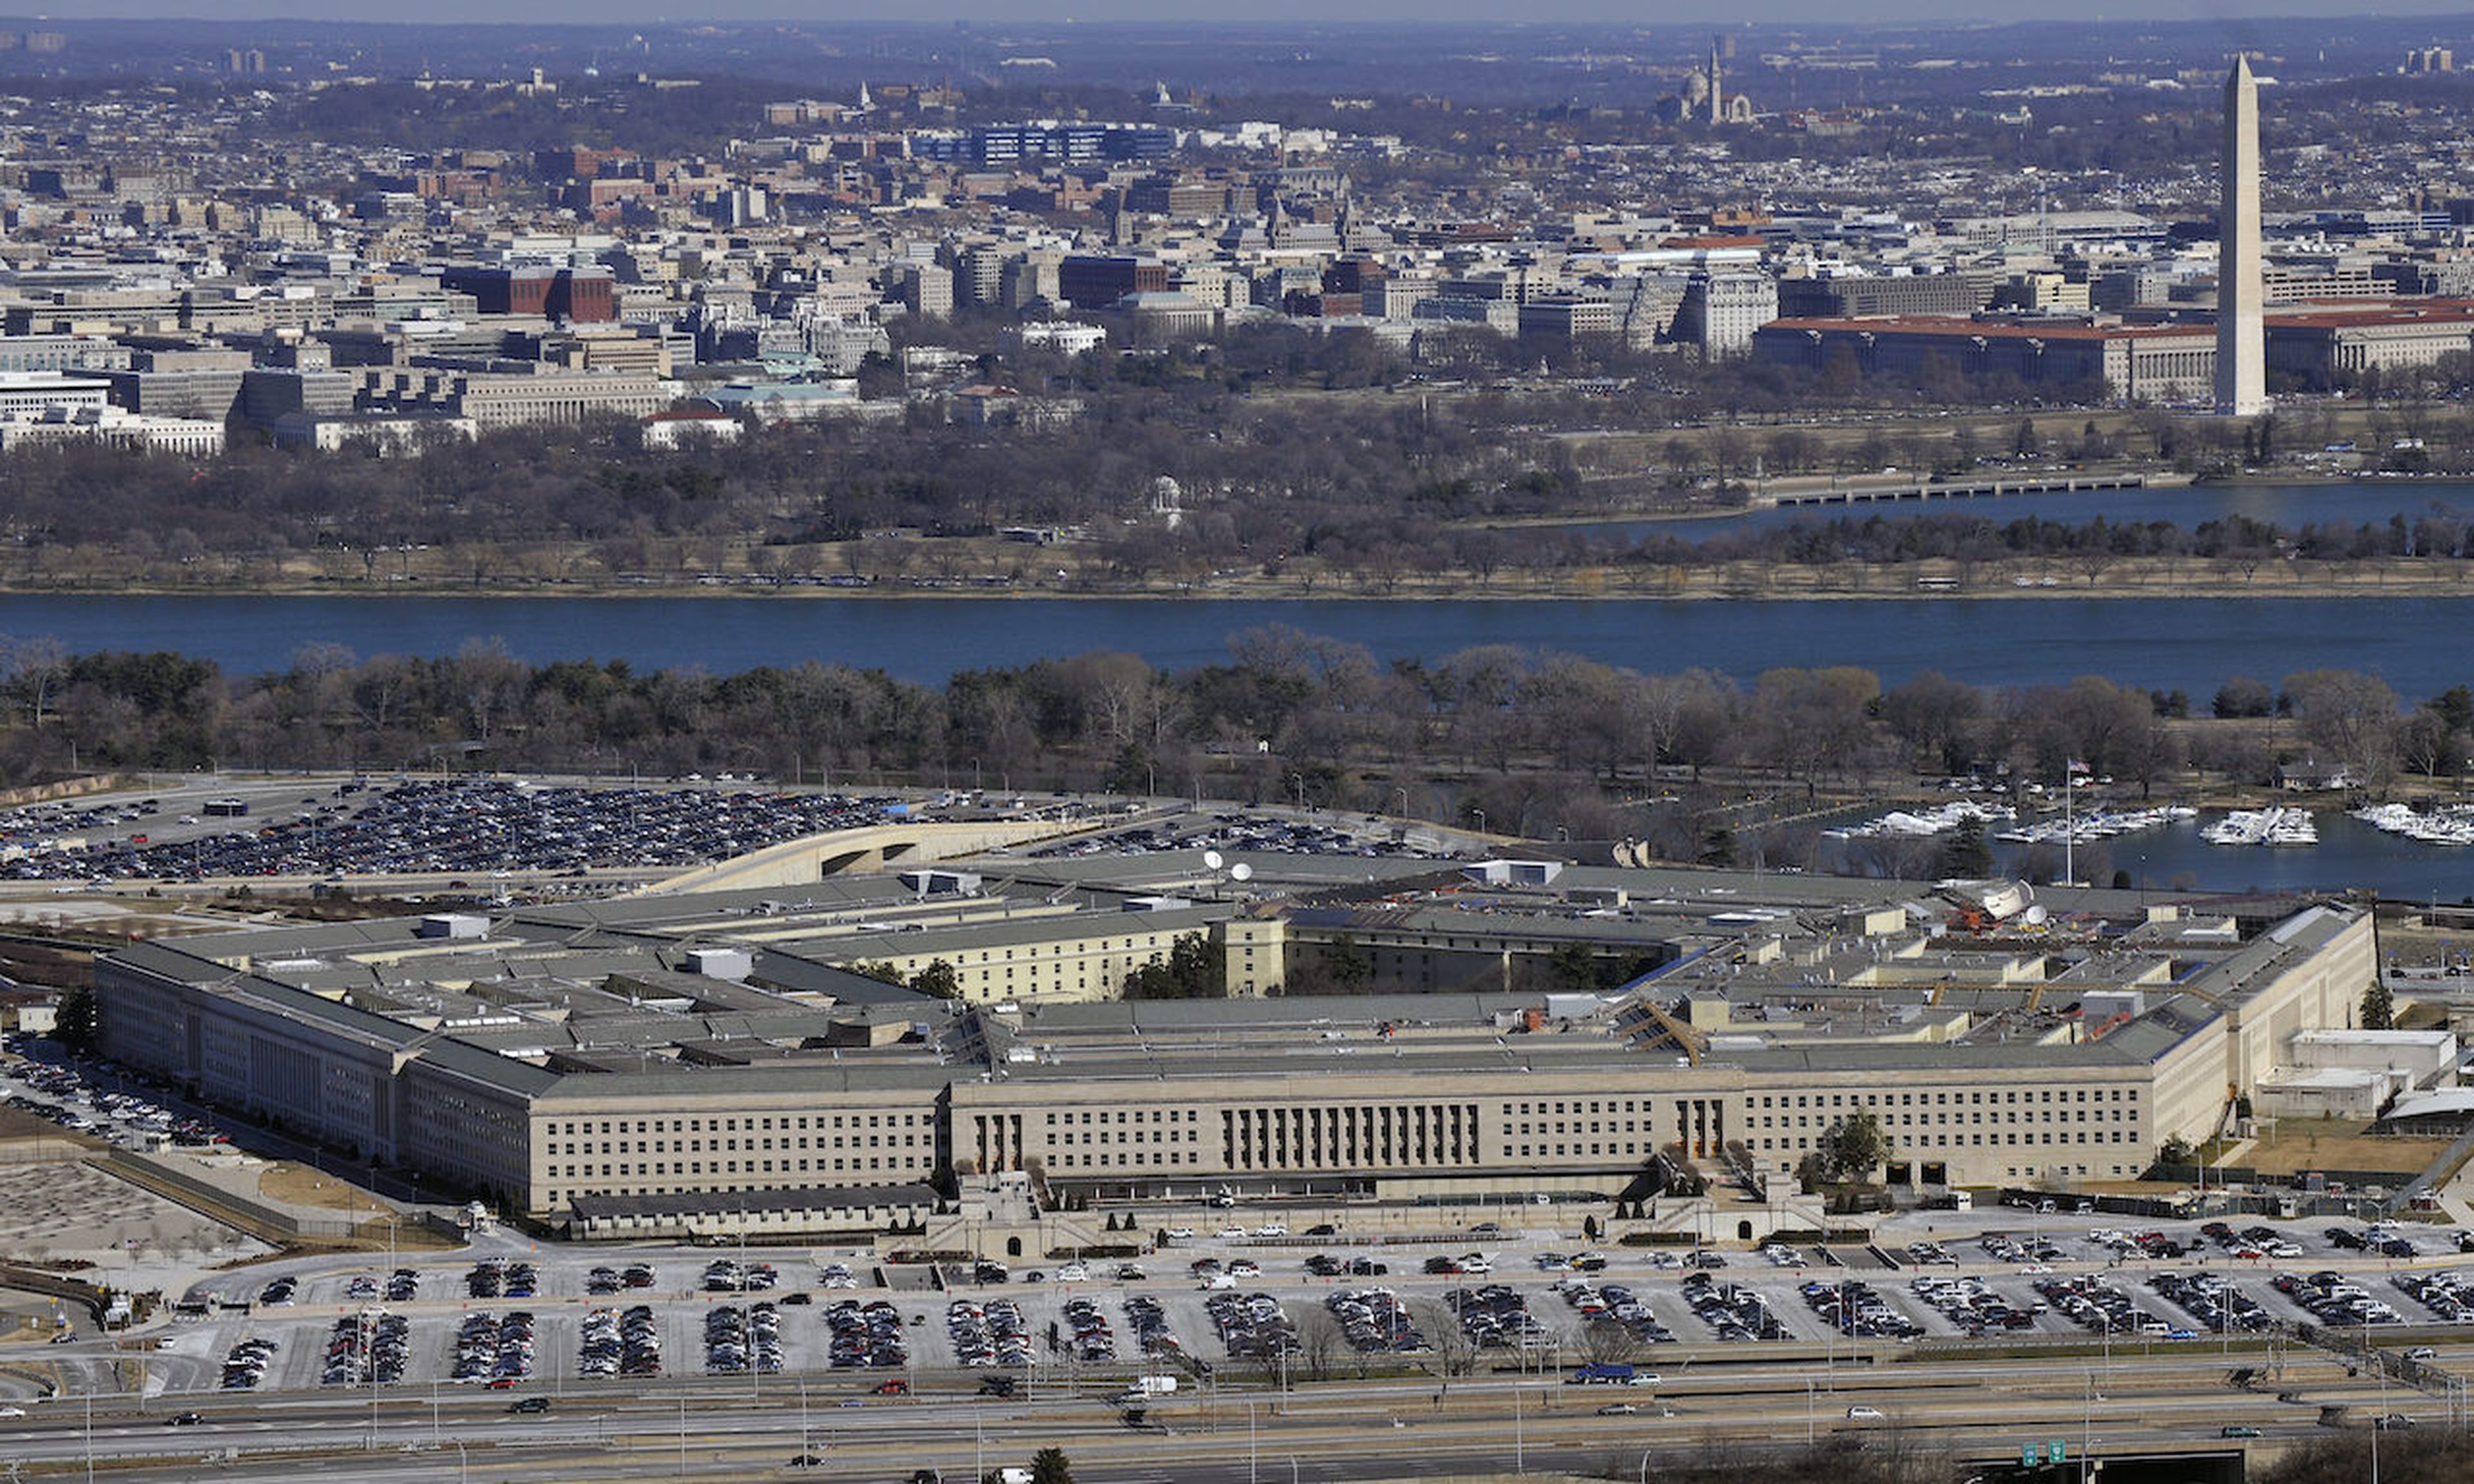 The Pentagon with the Washington Monument and National Mall in the background. A proposed Cybersecurity Threat Information Collaboration Environment is designed to foster better coordination between DOD, DHS and the intelligence community around cyber threat information sharing. (U.S. Air Force Photo by Senior Airman Perry Aston)